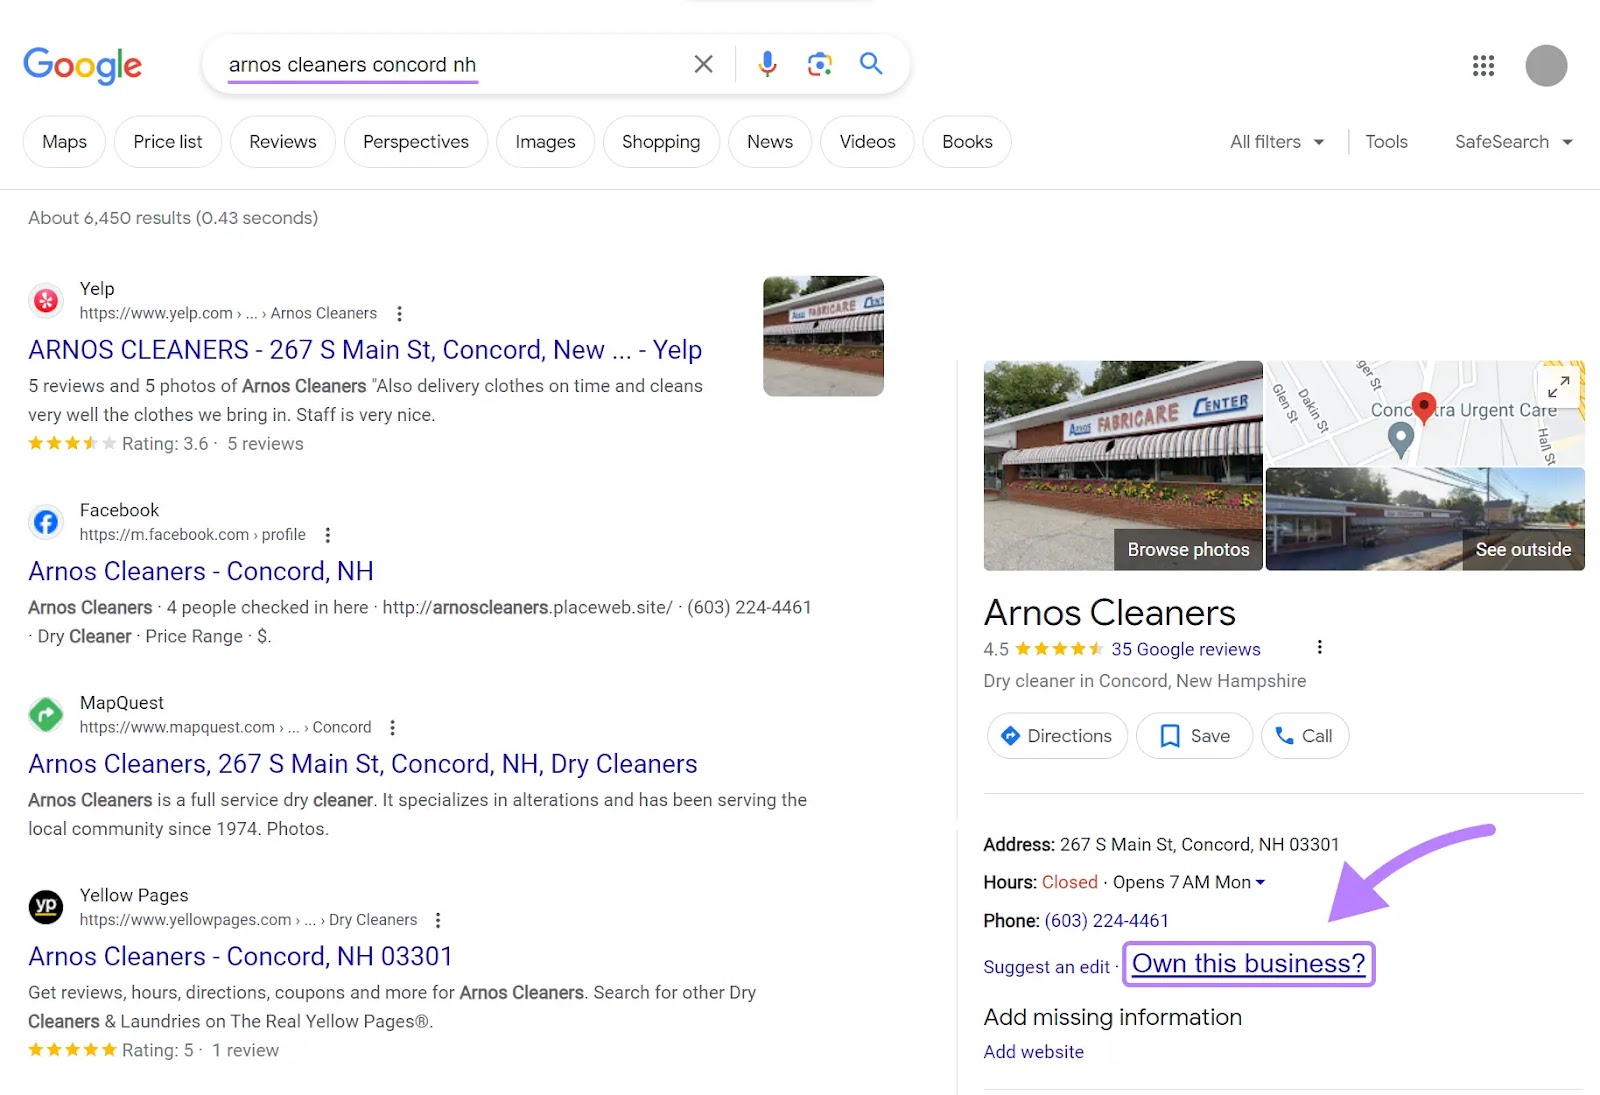 “Own this business?” link highlighted under "Arnos Cleaners" business on Google